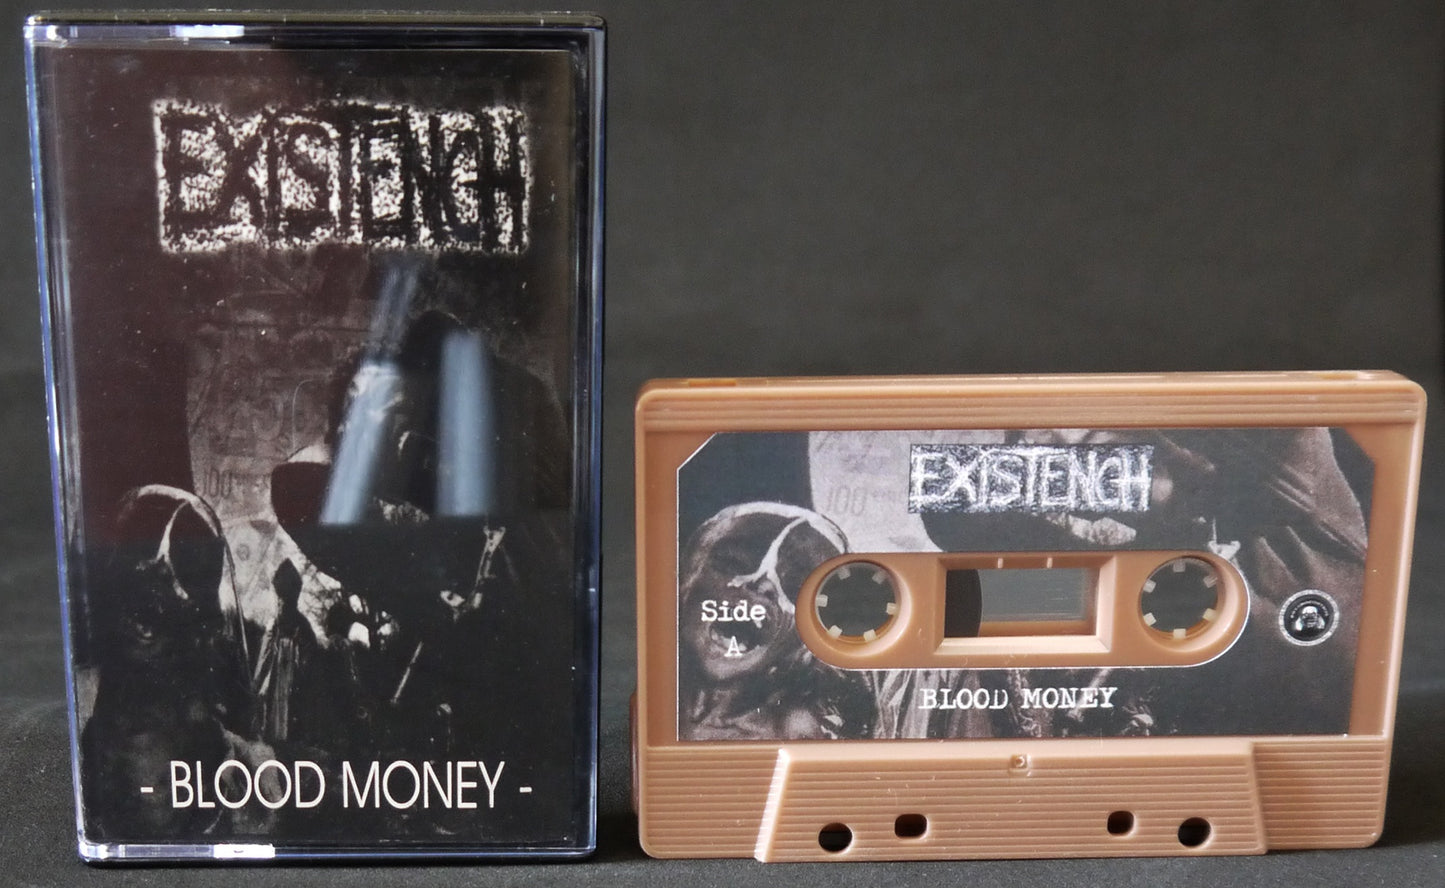 EXISTENCH - Blood Money Tape